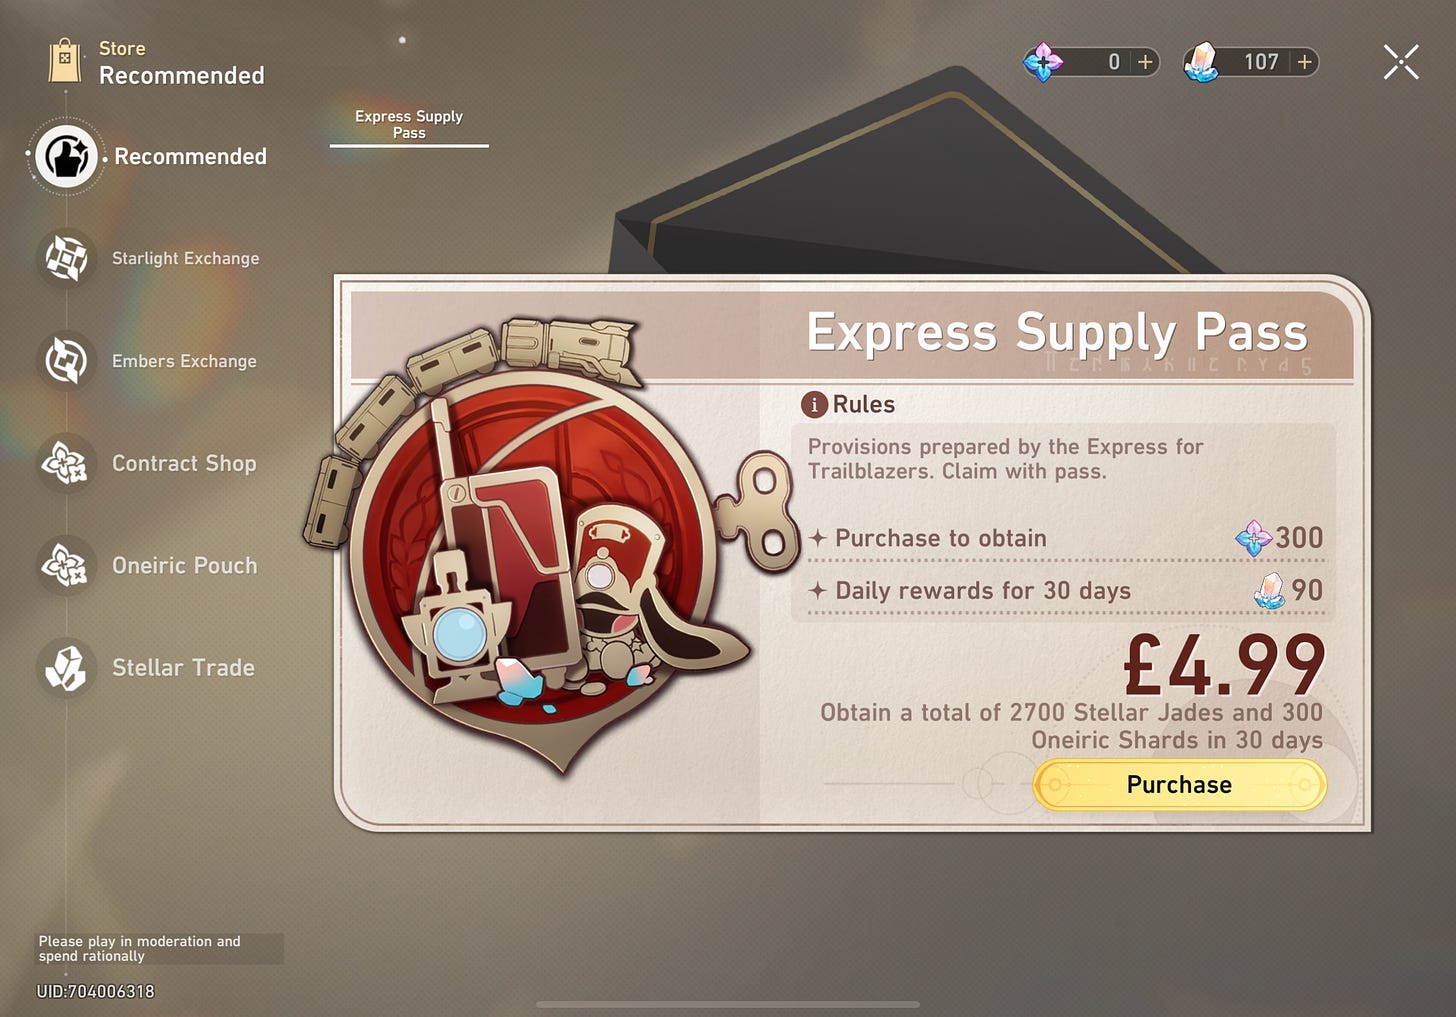 Express Supply Pass, costs £4.99